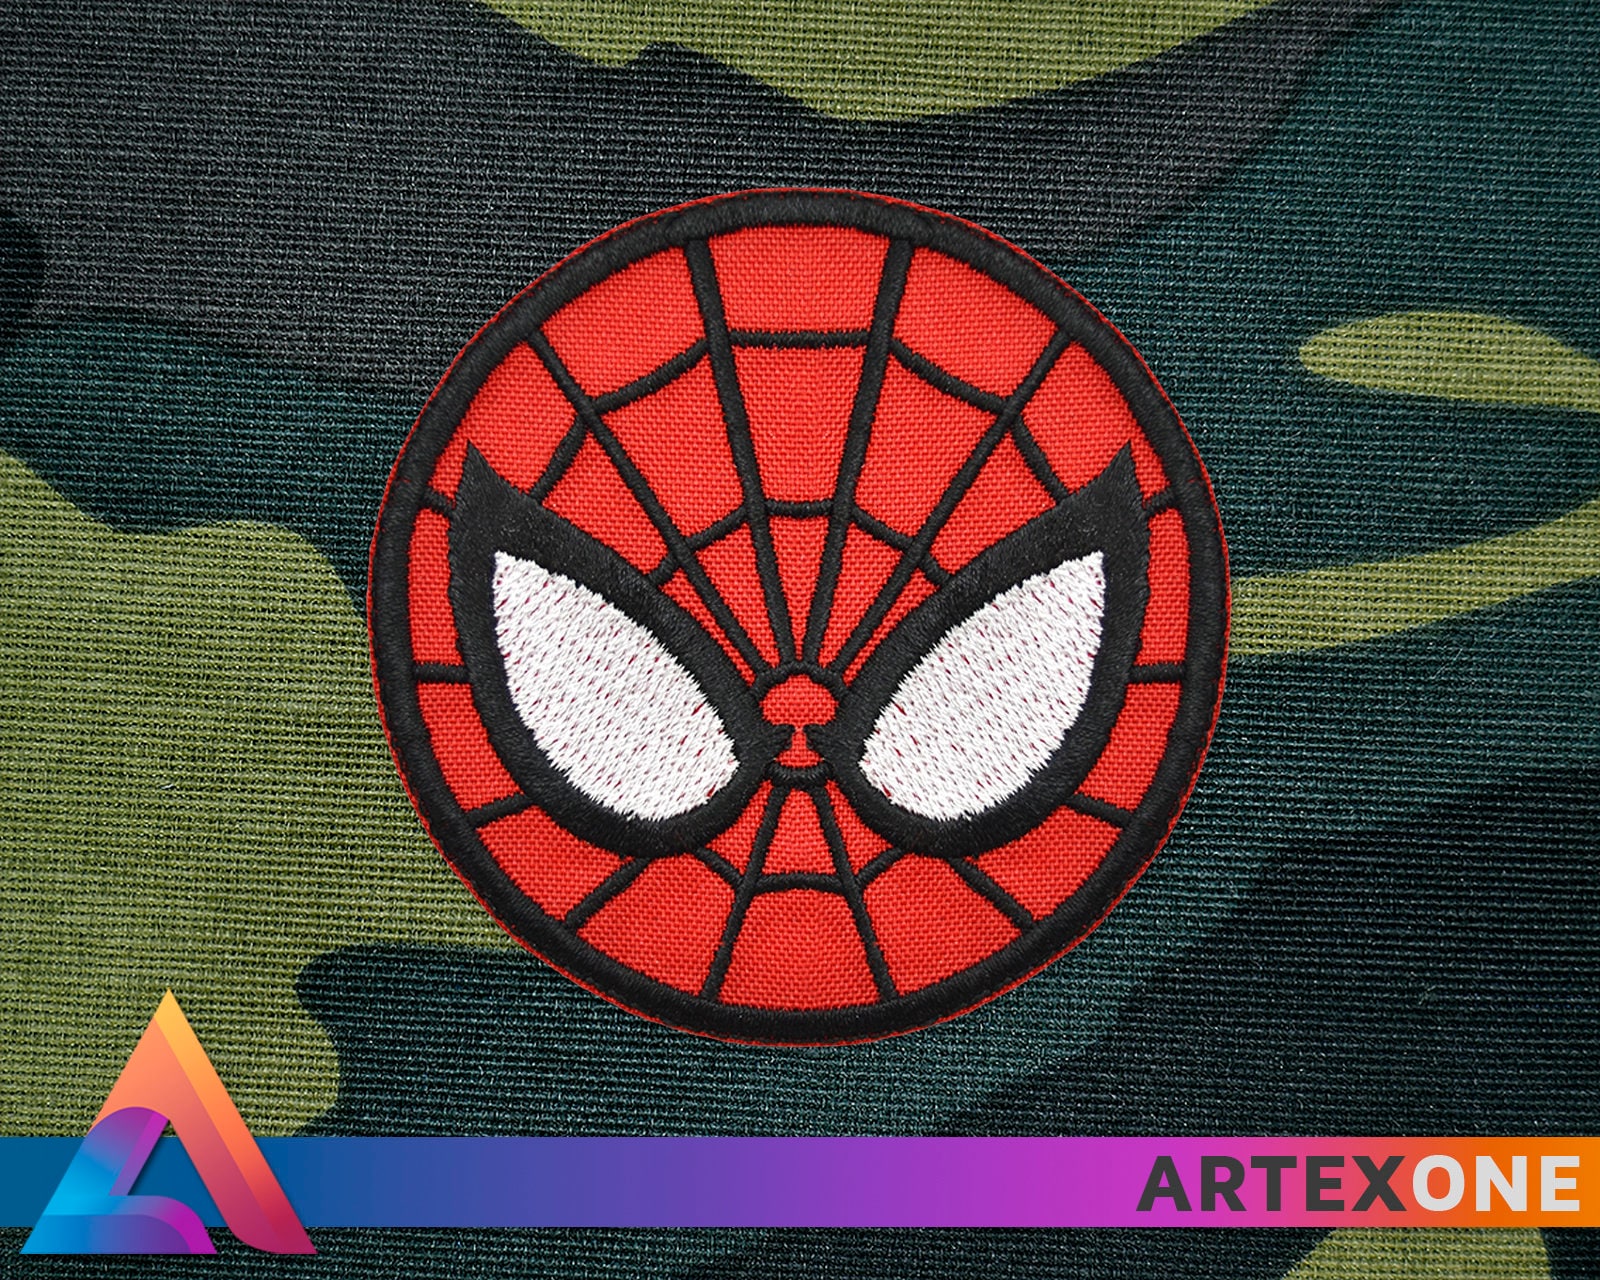 Marvel Classic Spiderman Spider Logo Embroidered Iron On Applique Patch –  Patch Collection